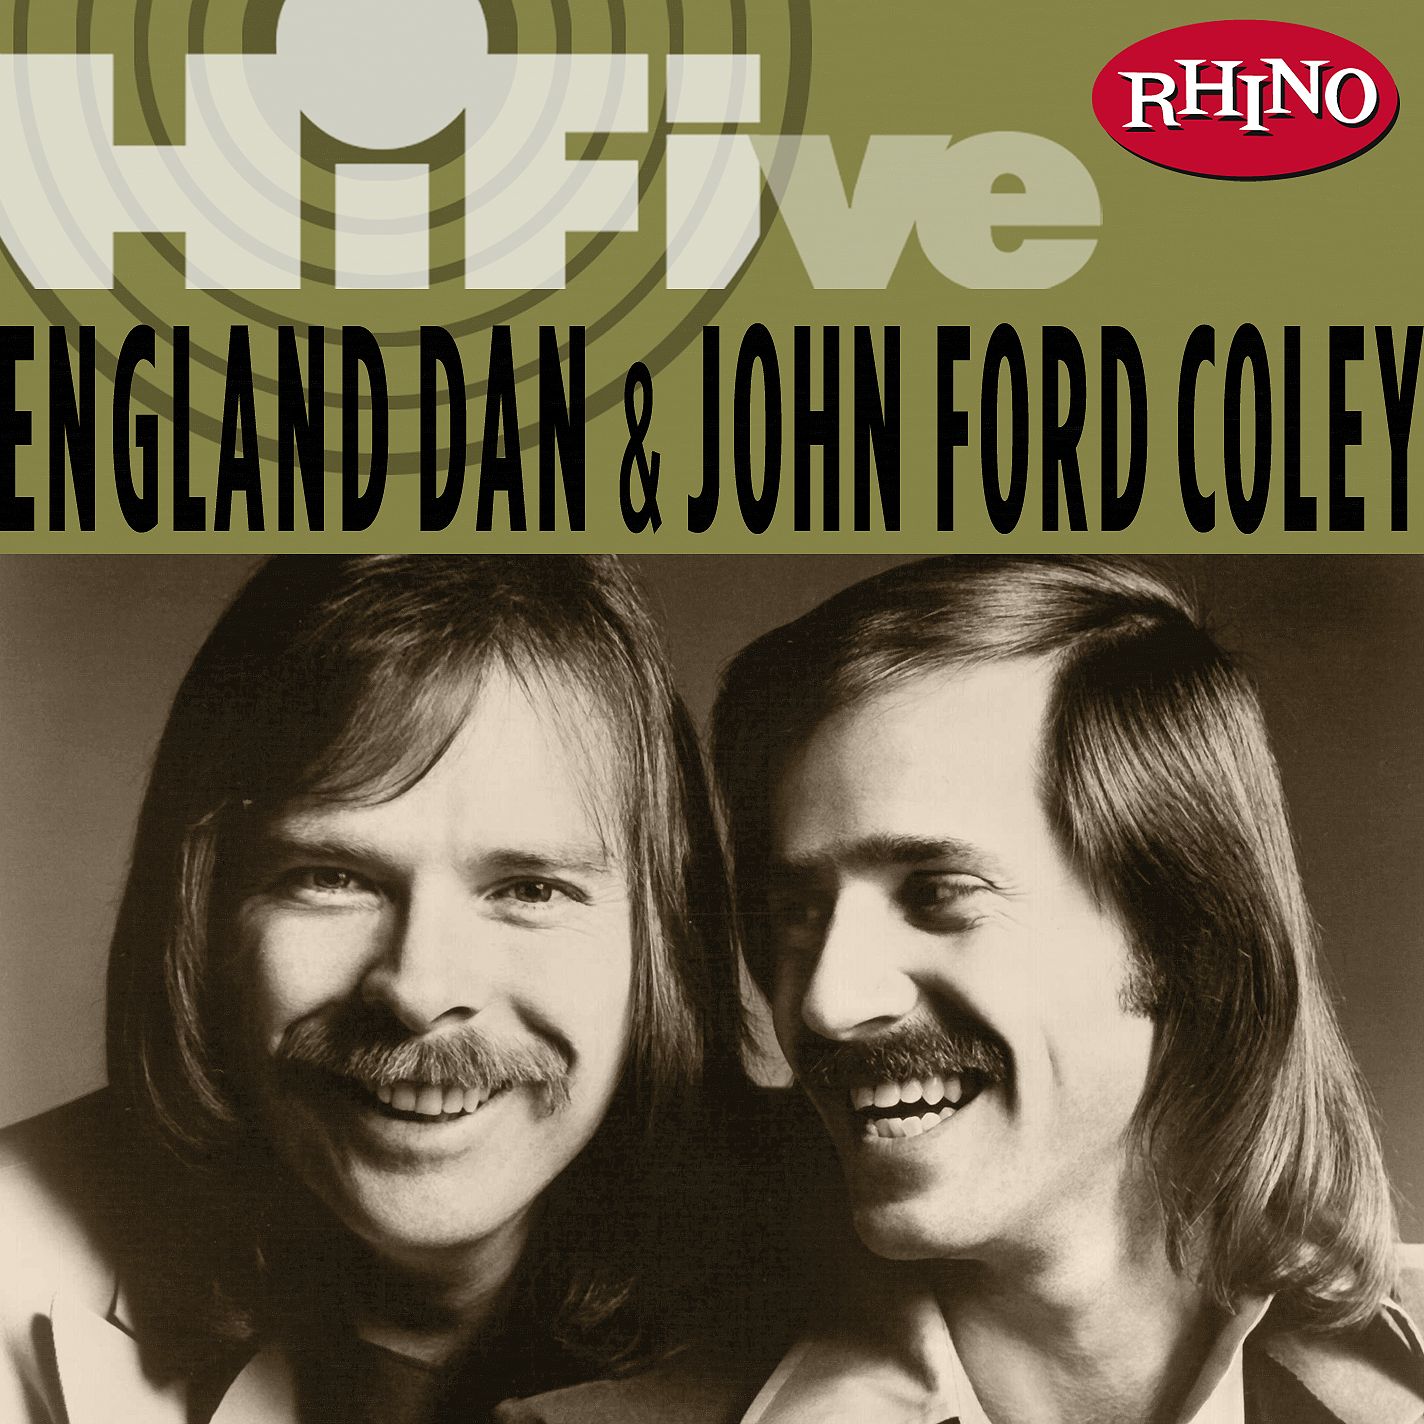 England dan and john ford coley greatest hits #2